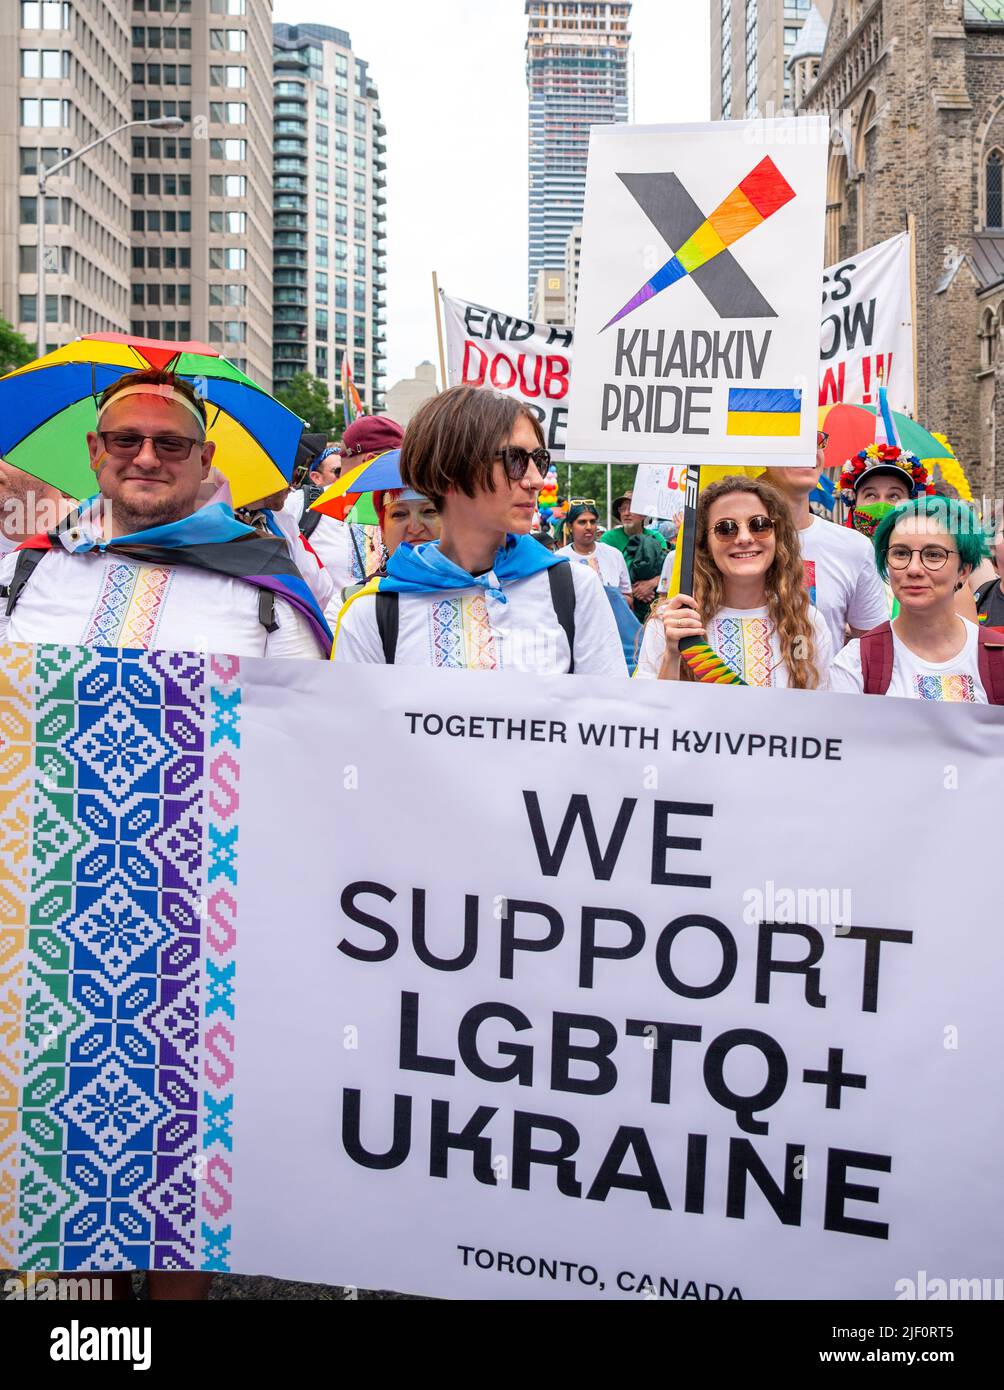 A group of people marching in Pride Parade with signs in support of LGBTQ+ Ukraine Stock Photo